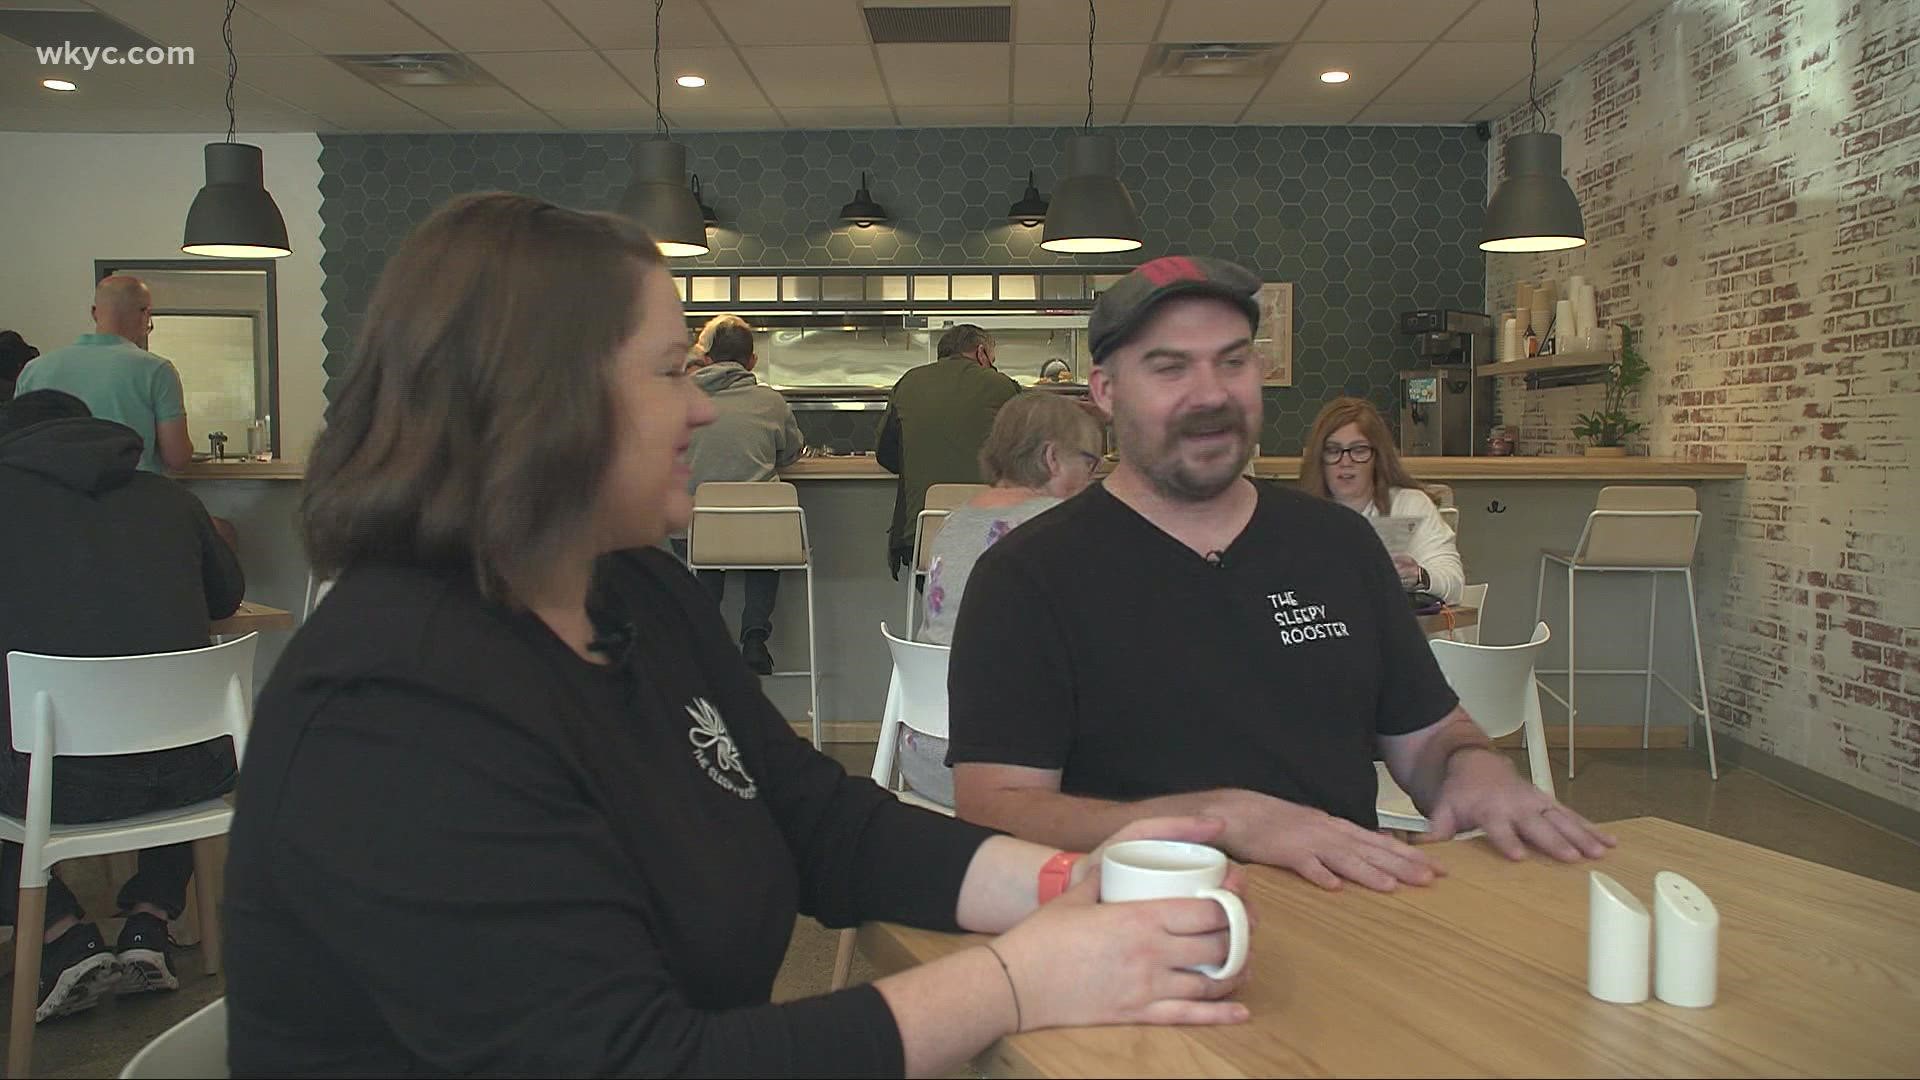 If breakfast and brunch are your thing, this place in Geauga County is for you. Jay Crawford shows us around.